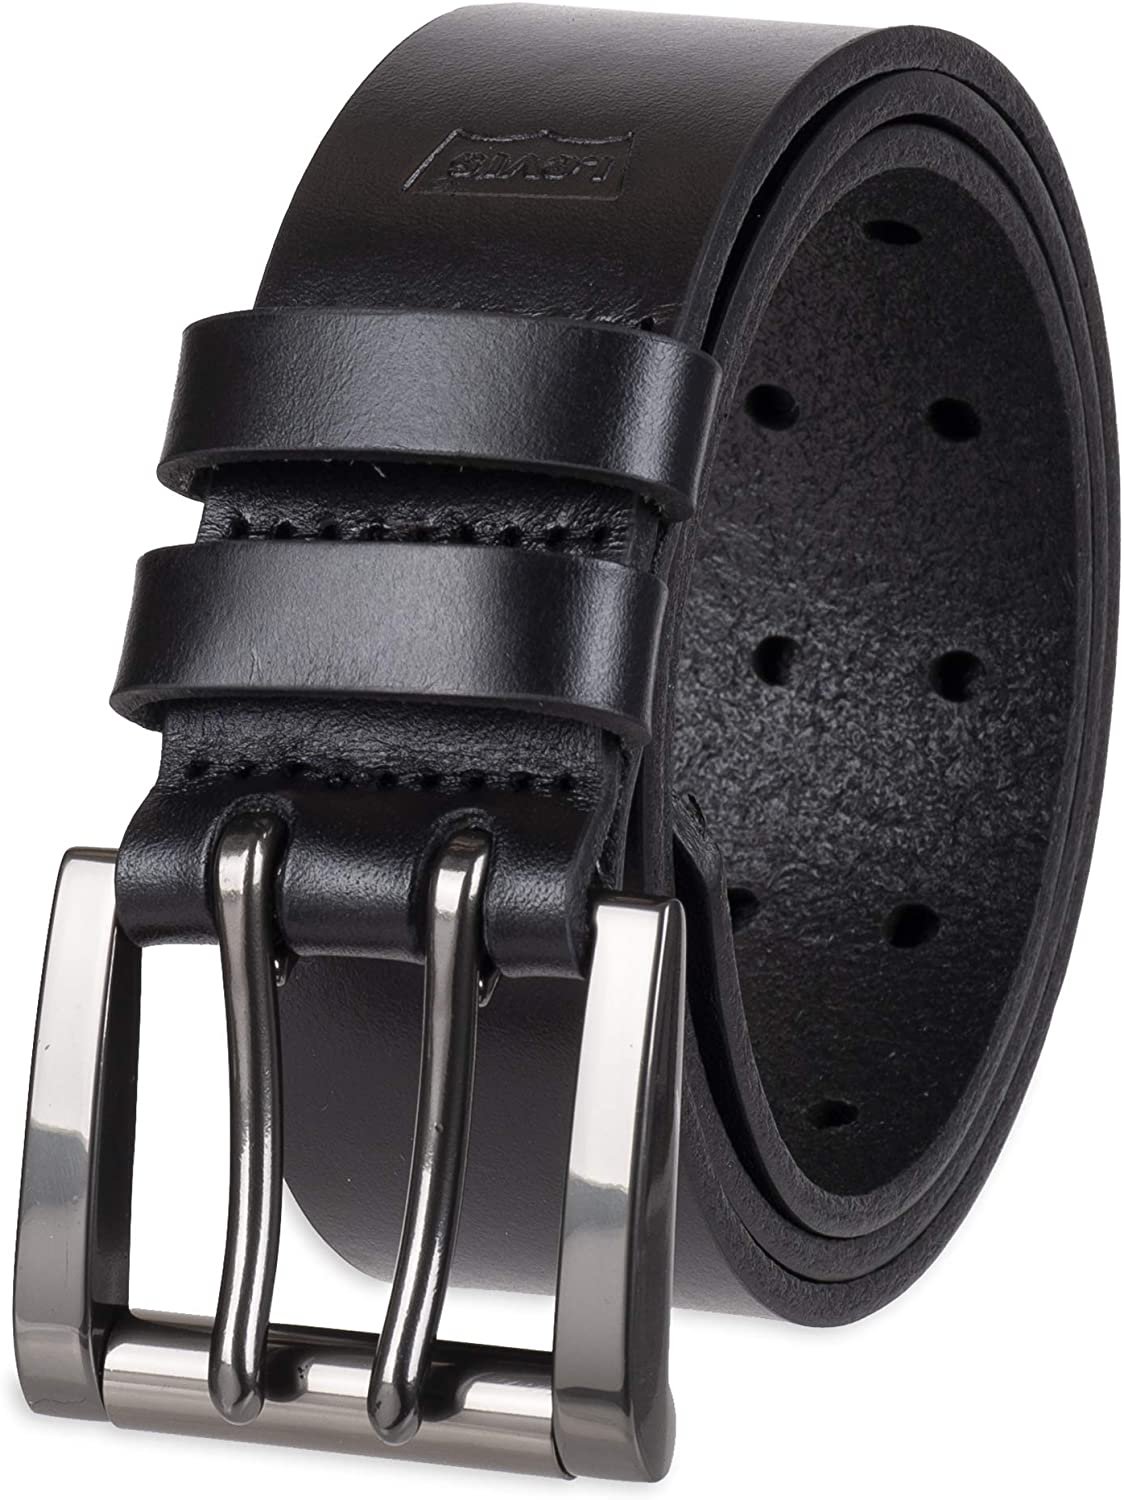 NEW CLASSIC ROLLER CHROME BELT BUCKLE with TIP ONLY for 1.25" inch Canvas Belts 